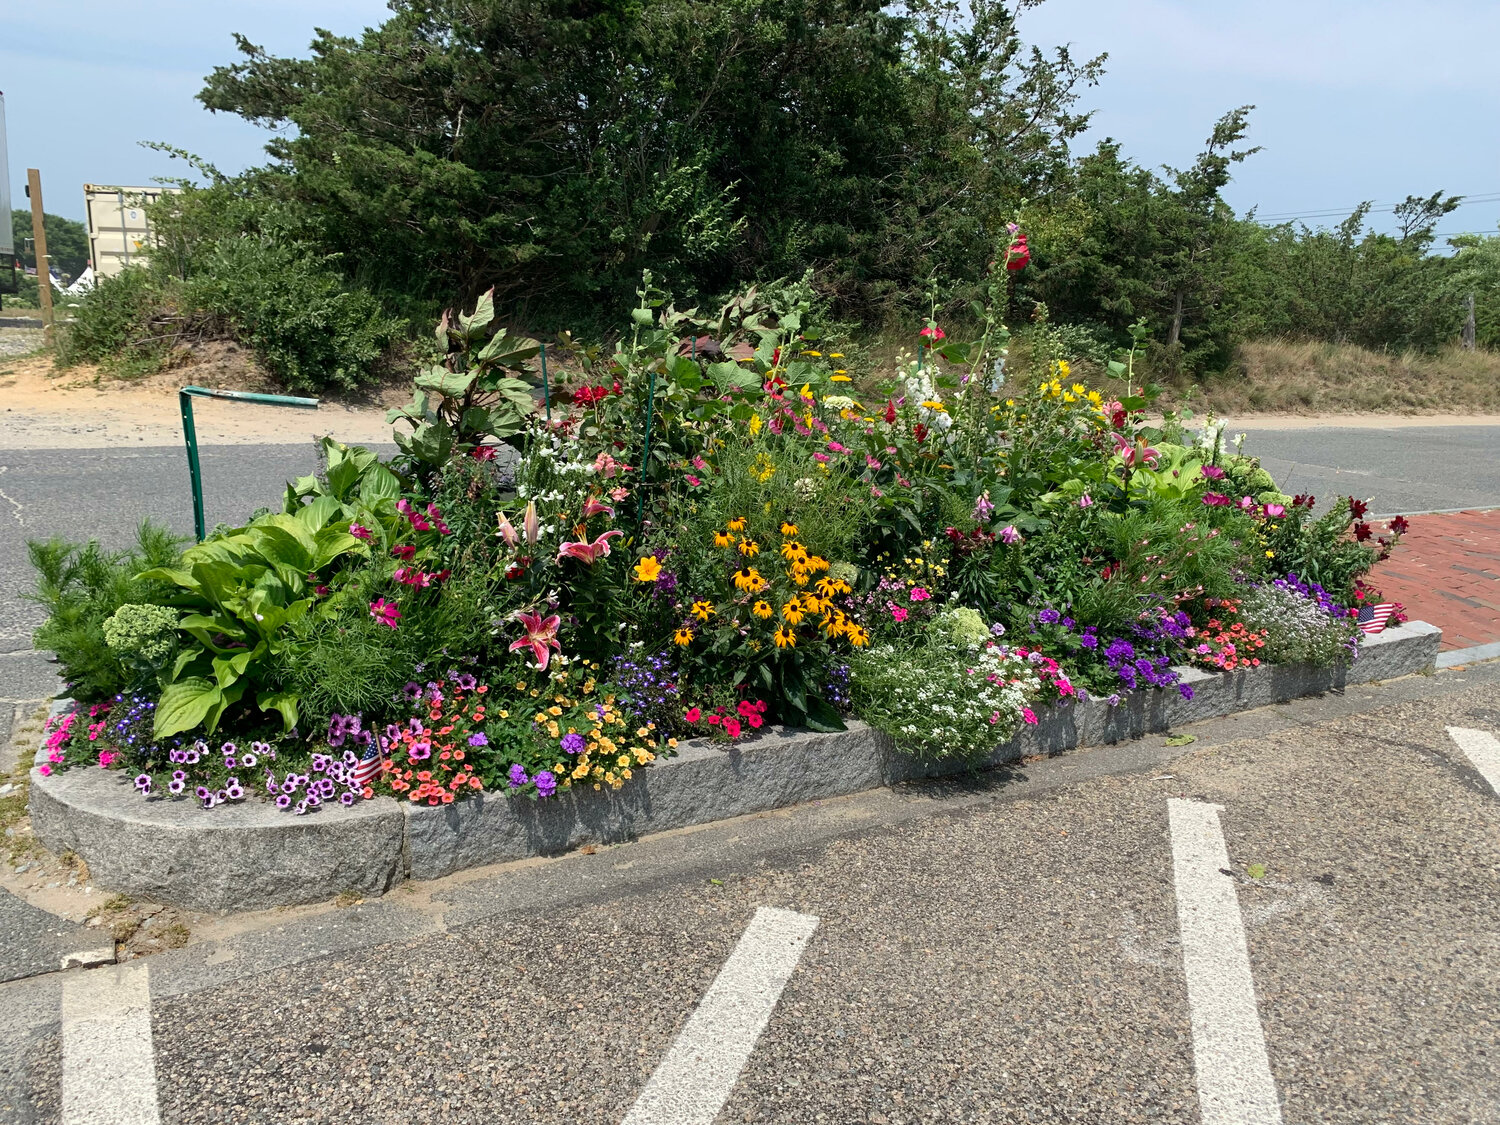 Menuka Thapa has livened up the parking lot of the Sanford Boat Building by planting colorful flowers in its concrete islands.